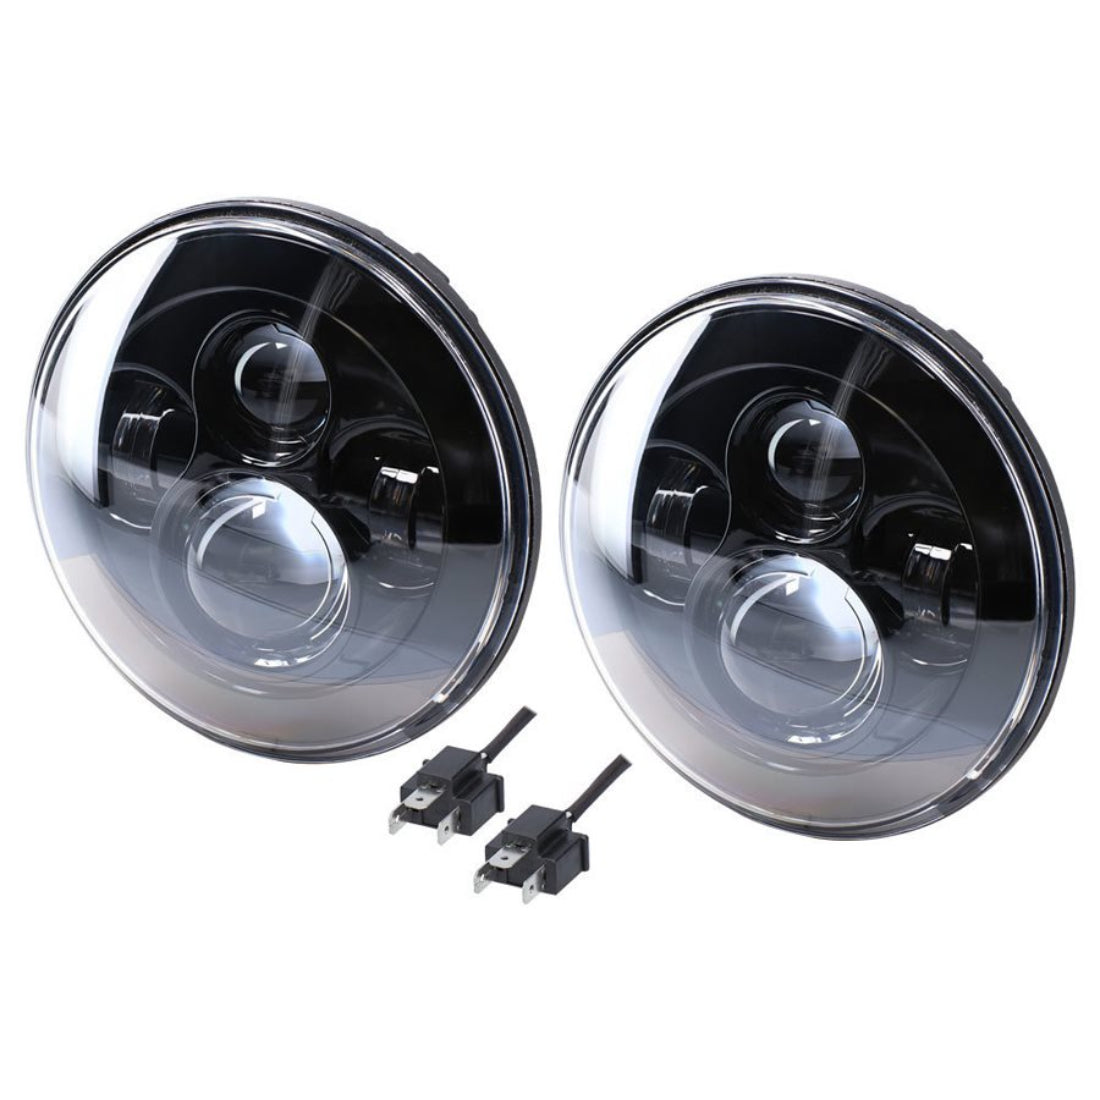 HEISE JP-701B Headlights with Black Face - 7 Inch, 9 LED